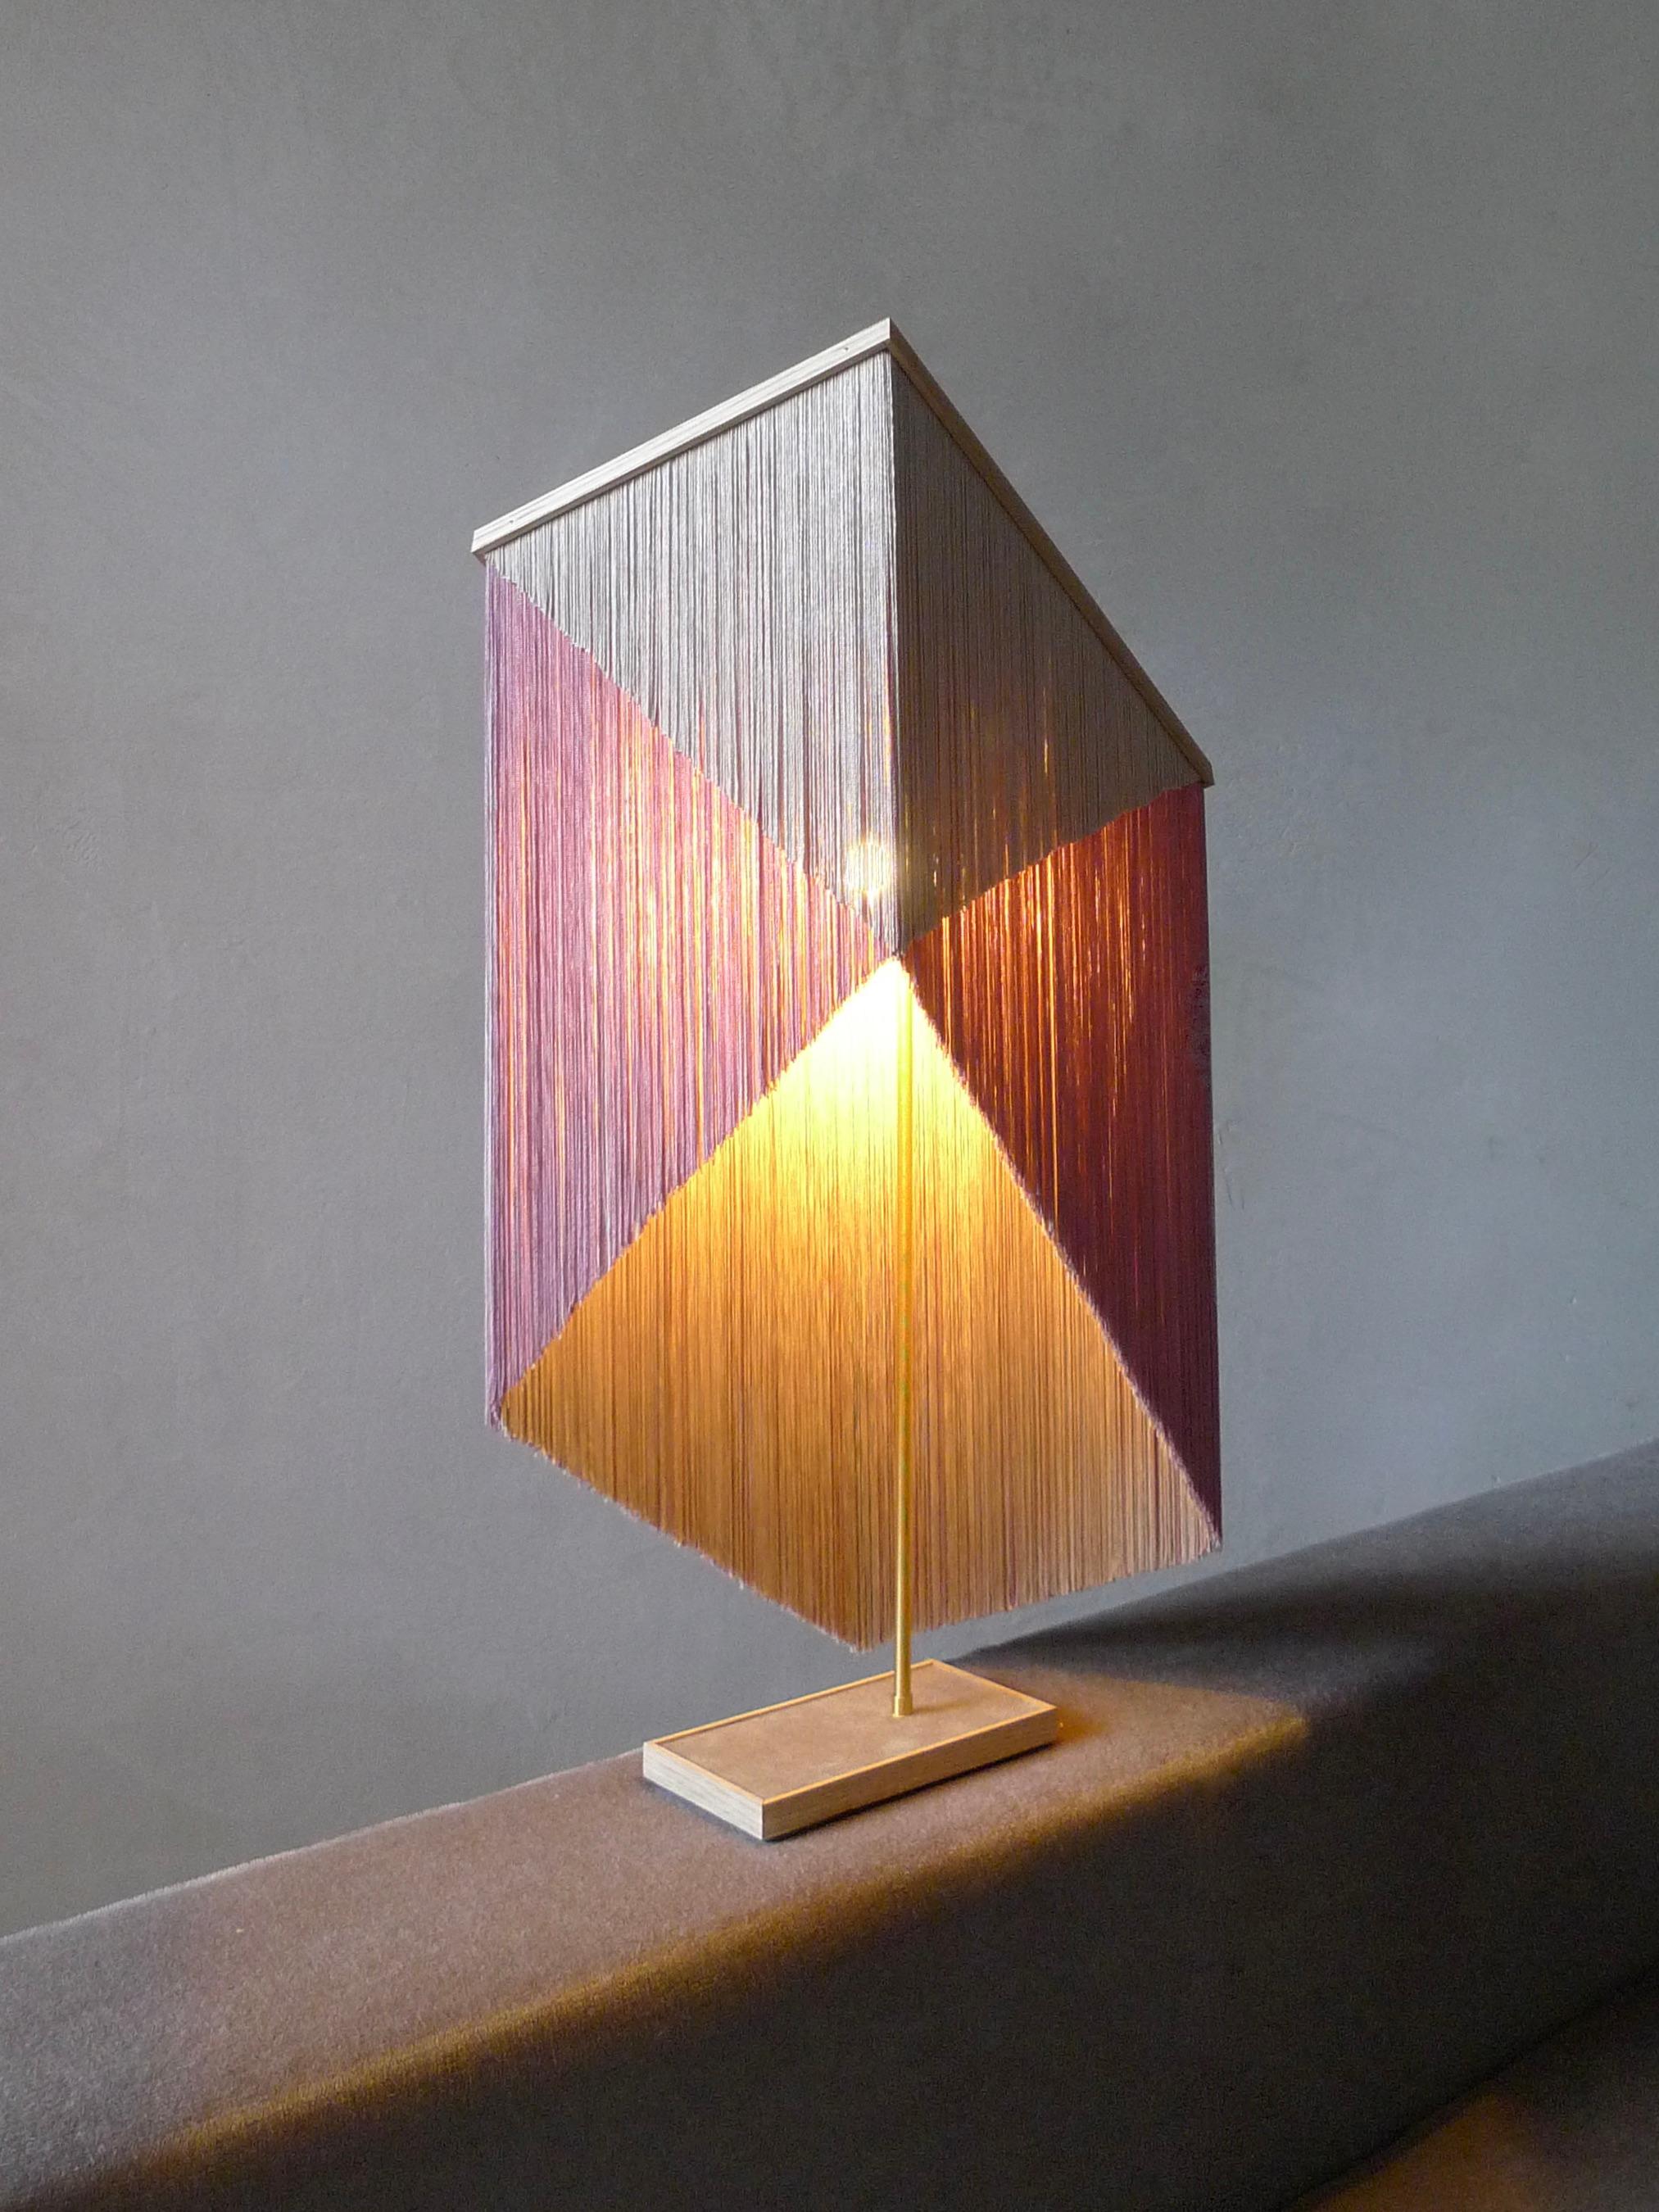 No. 30 table lamp by Sander Bottinga.
Object size 3.
Dimensions: H 60-75 x W 37 x D 26 cm.
Materials: brass, wood, leather, viscose fringes
Variations available. 

Handmade in brass, wood, leather and 3 double layered viscose fringes in
geometric